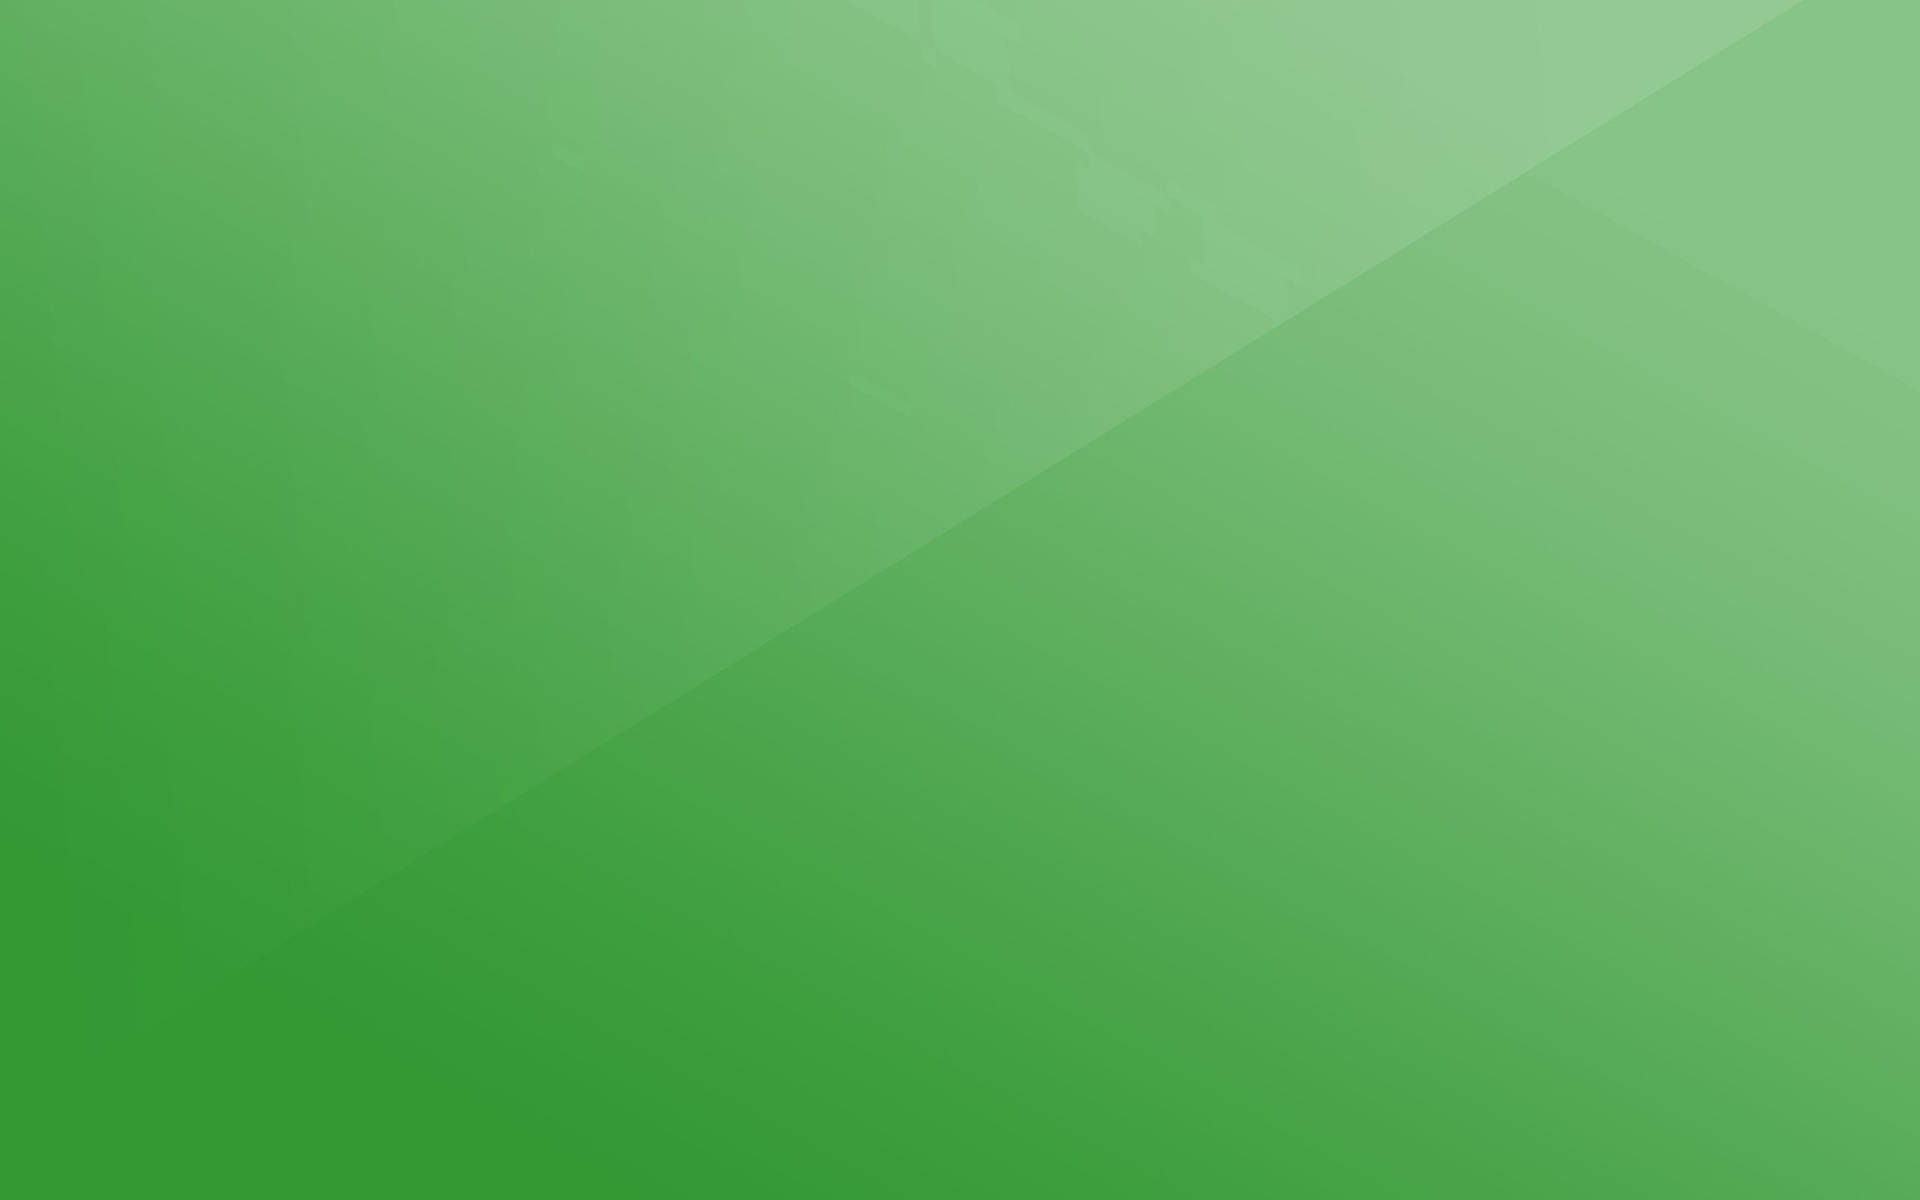 Green 2560X1600 Wallpaper and Background Image